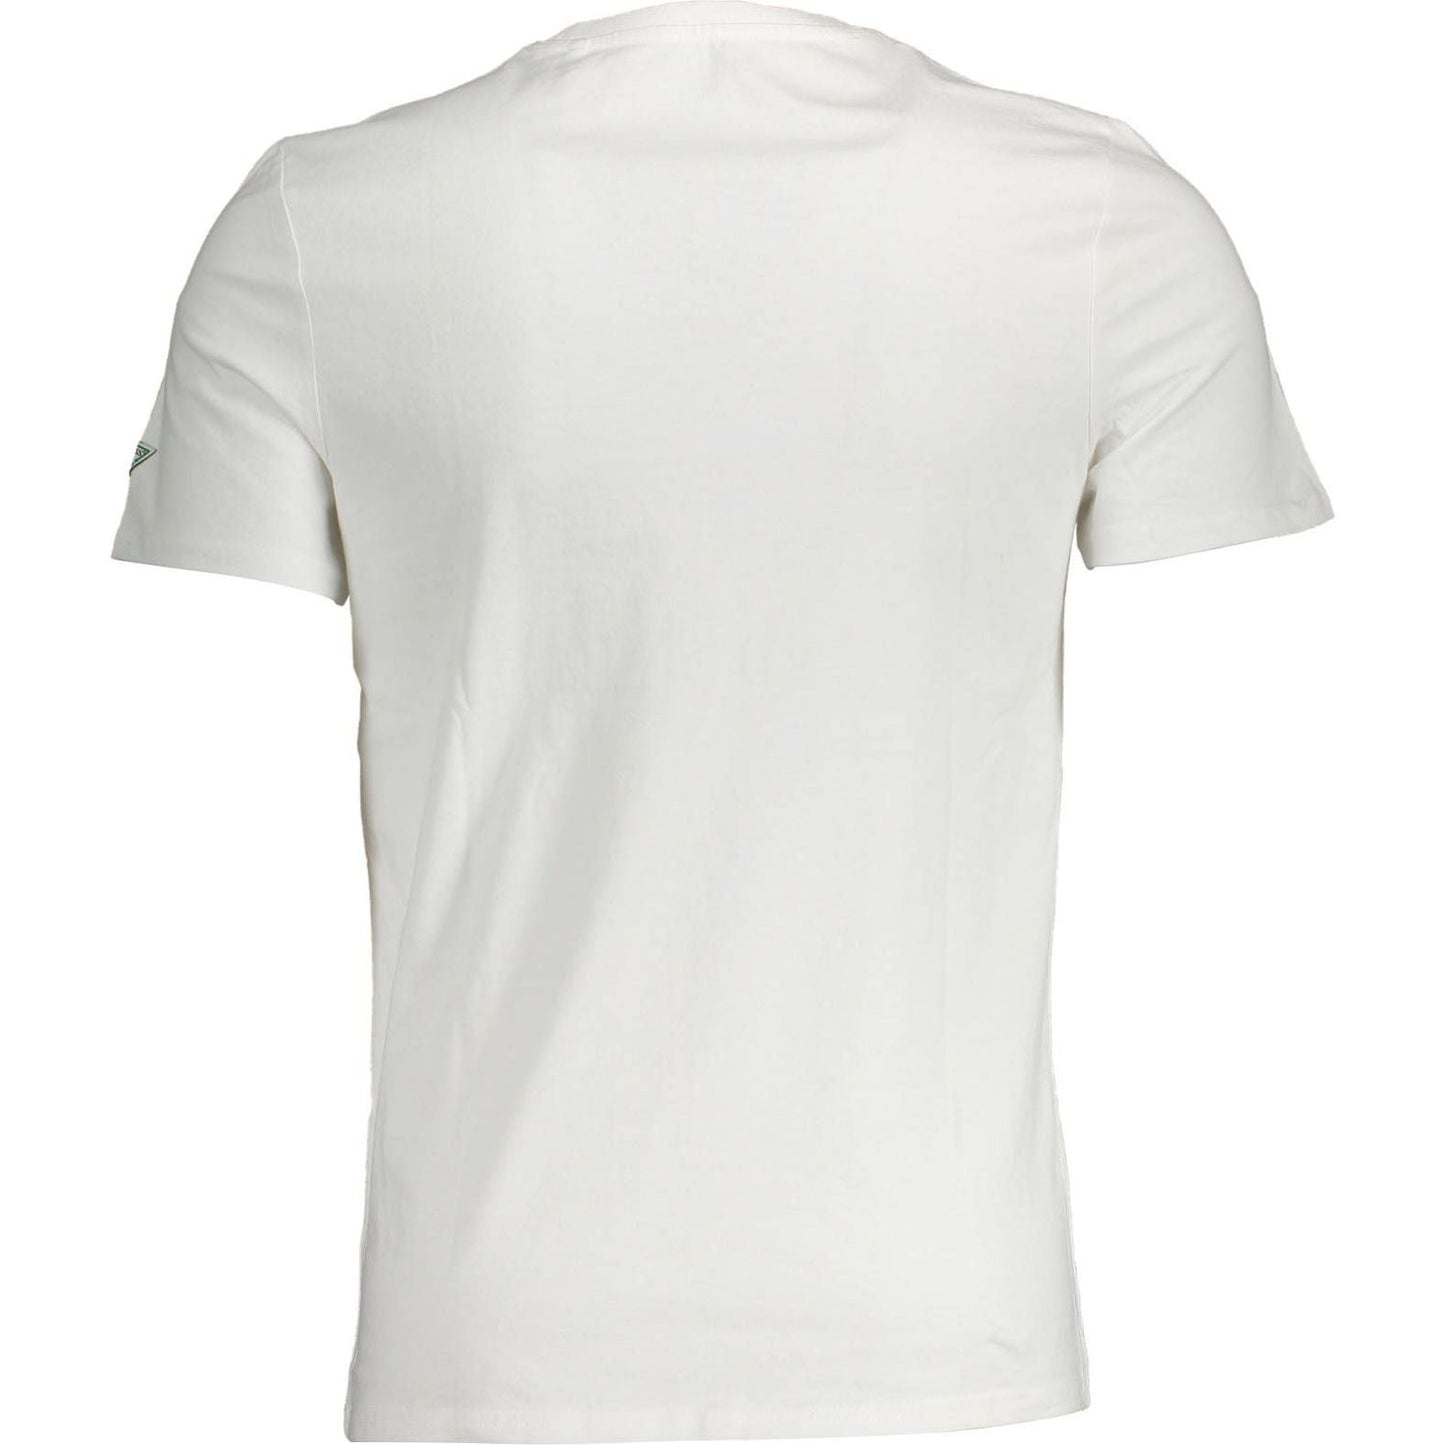 Guess Jeans Elegant Slim Fit White Tee with Print Detail elegant-slim-fit-white-tee-with-print-detail